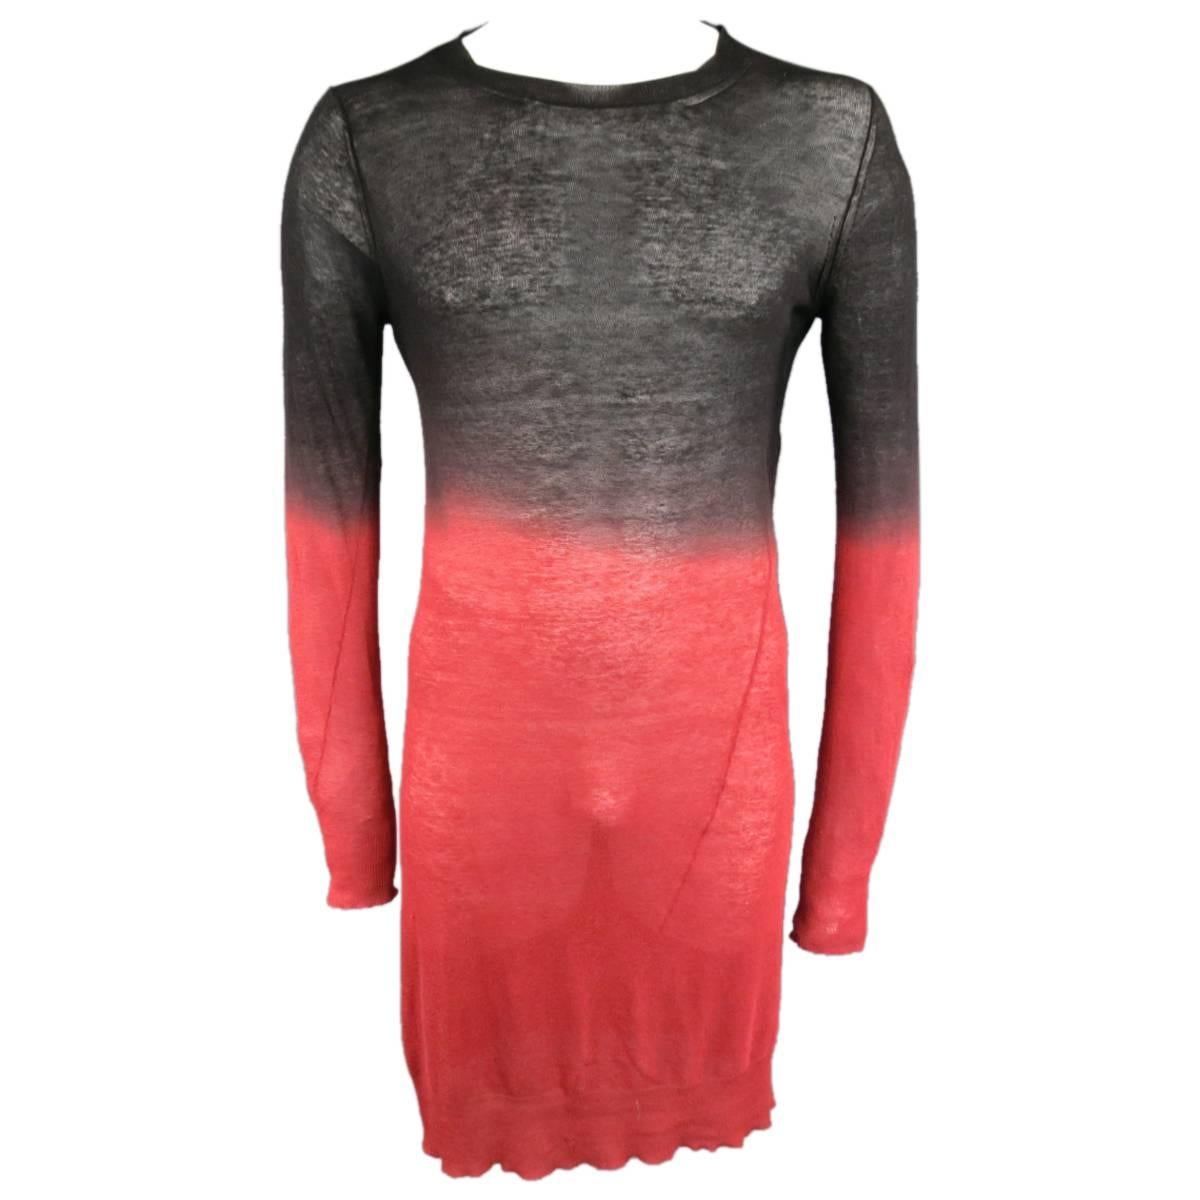 ANN DEMEULEMEESTER Size S Black & Red Sheer Cotton / Cashmere Long Line Pullover